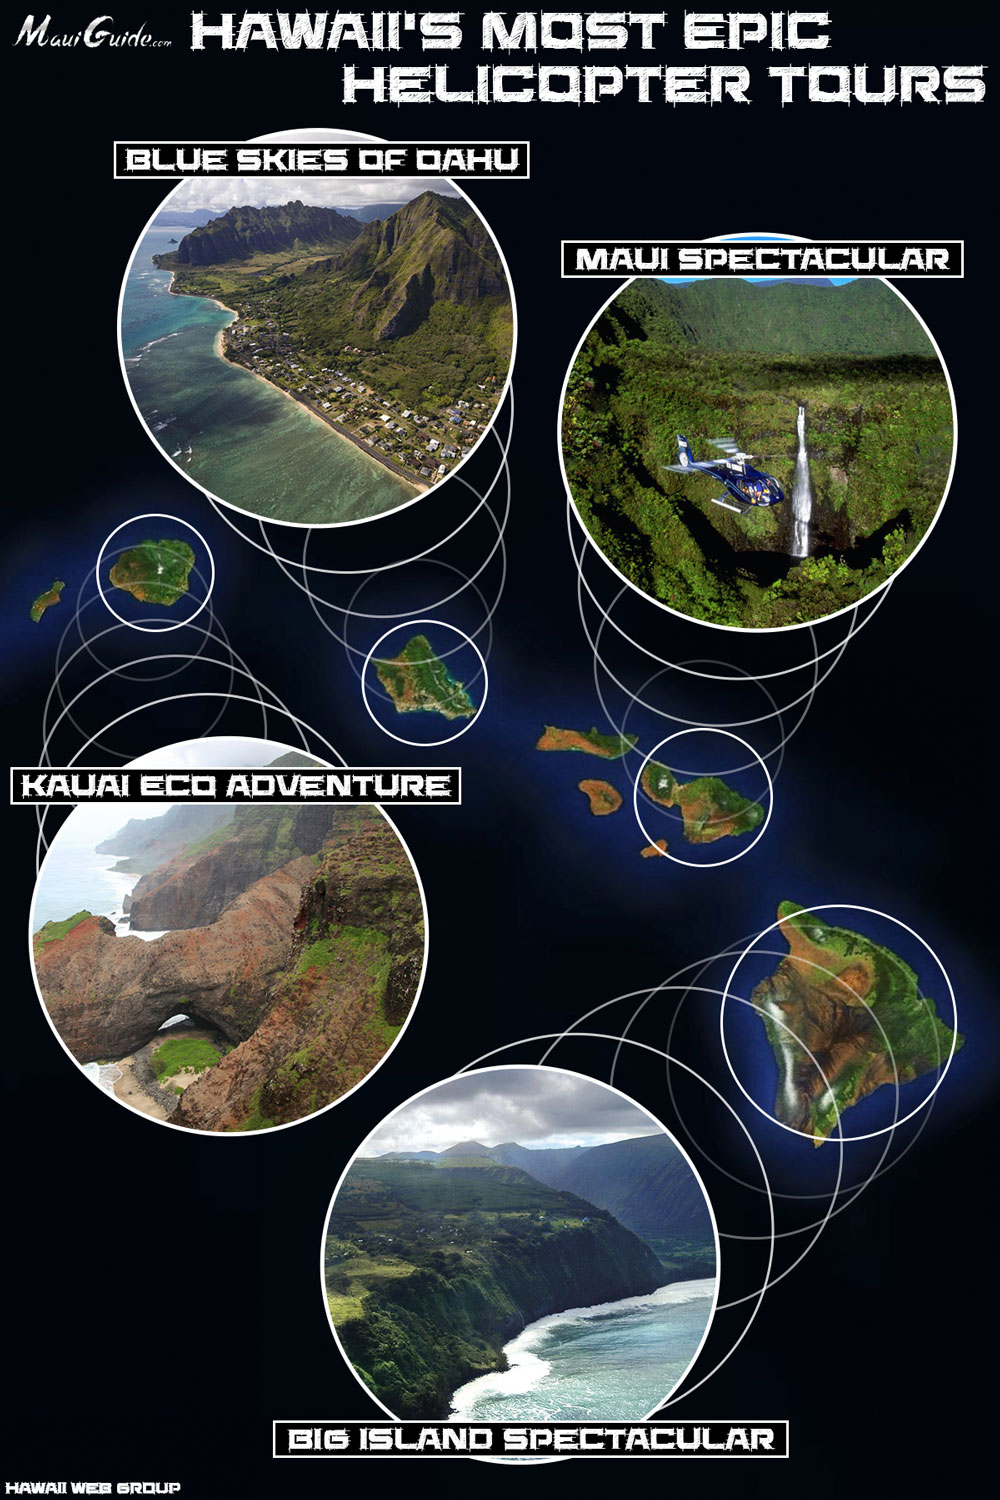 Hawaii's most epic helicopter tours infographic